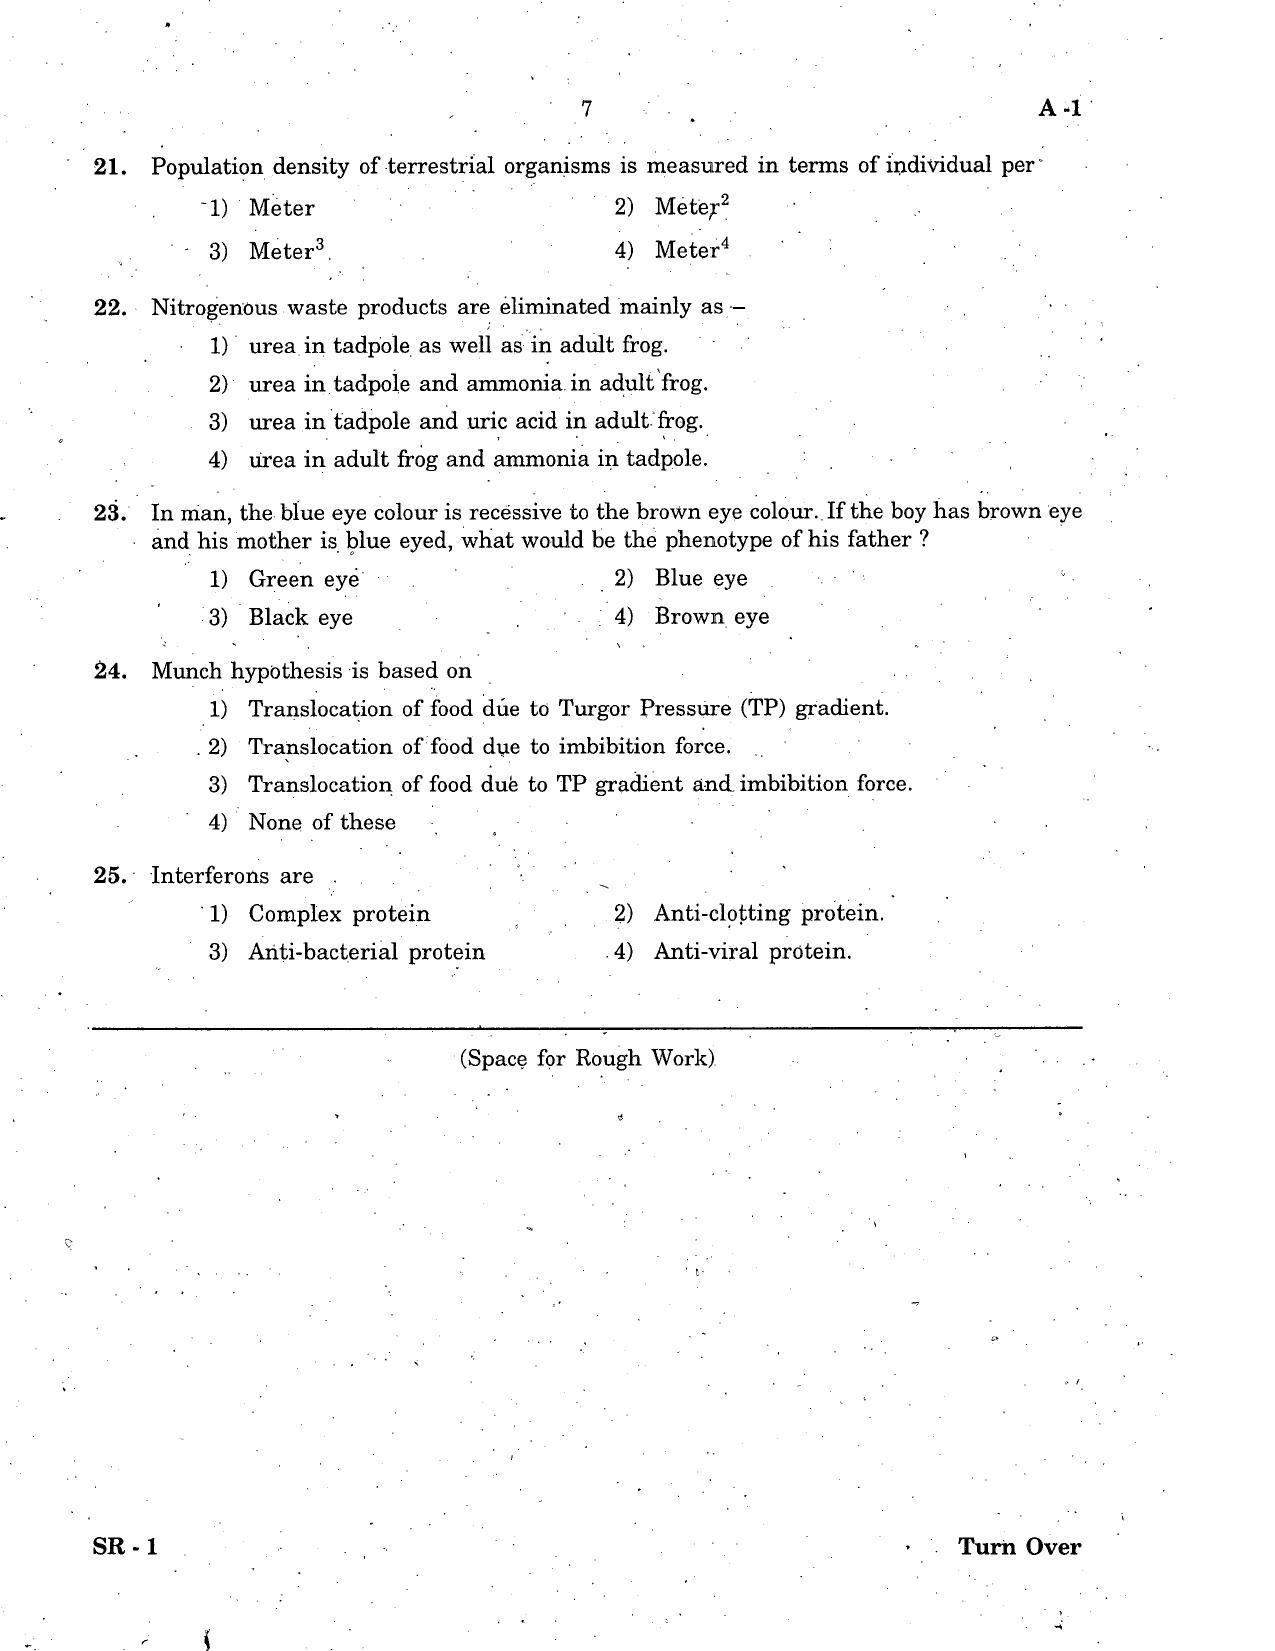 KCET Biology 2007 Question Papers - Page 7